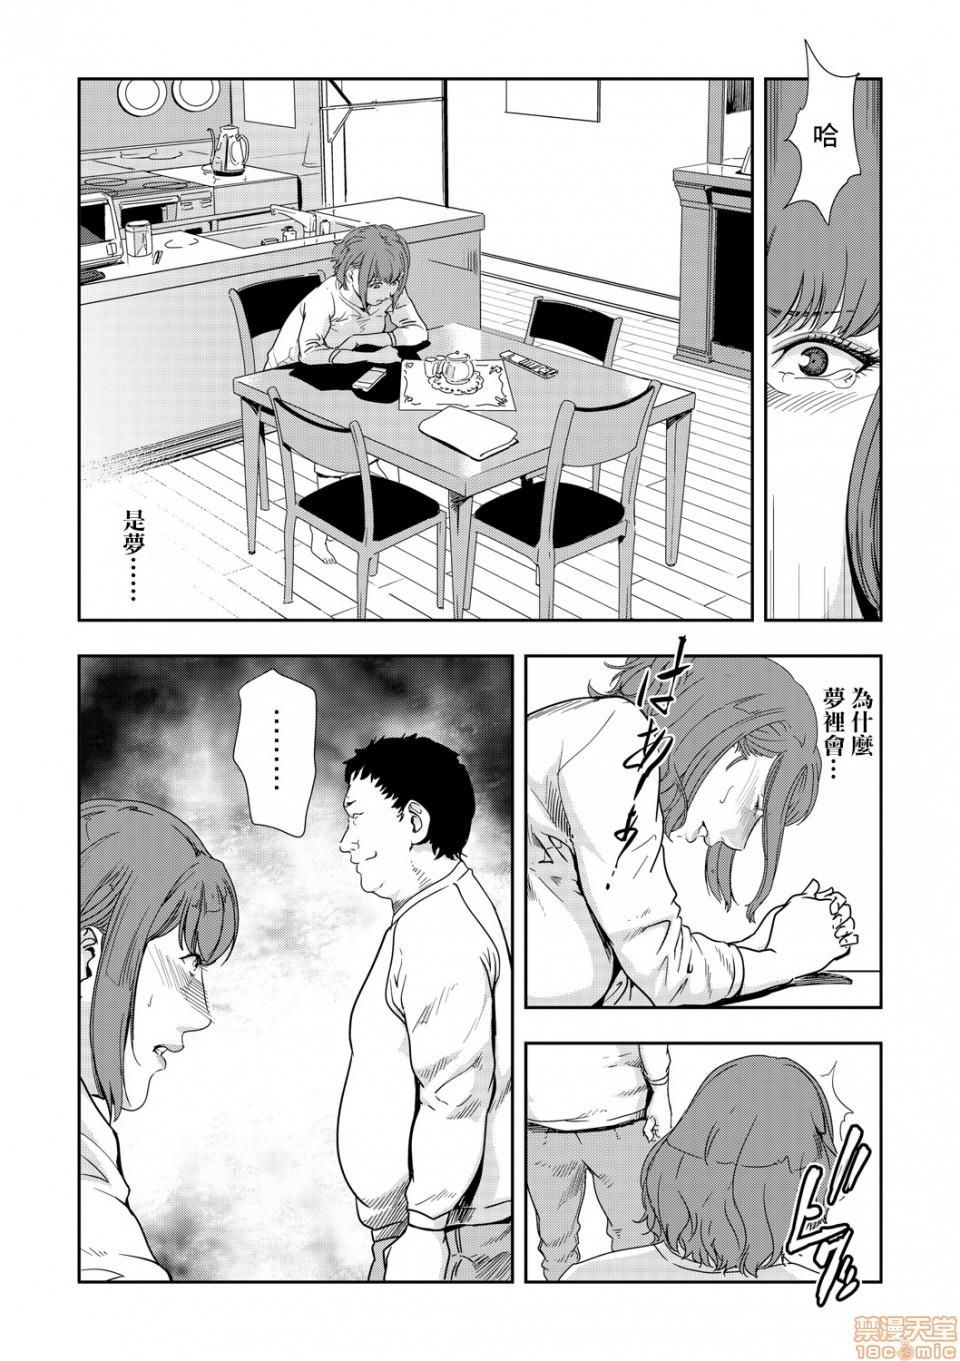 Chikan Express 9 Page 5 Of 27.